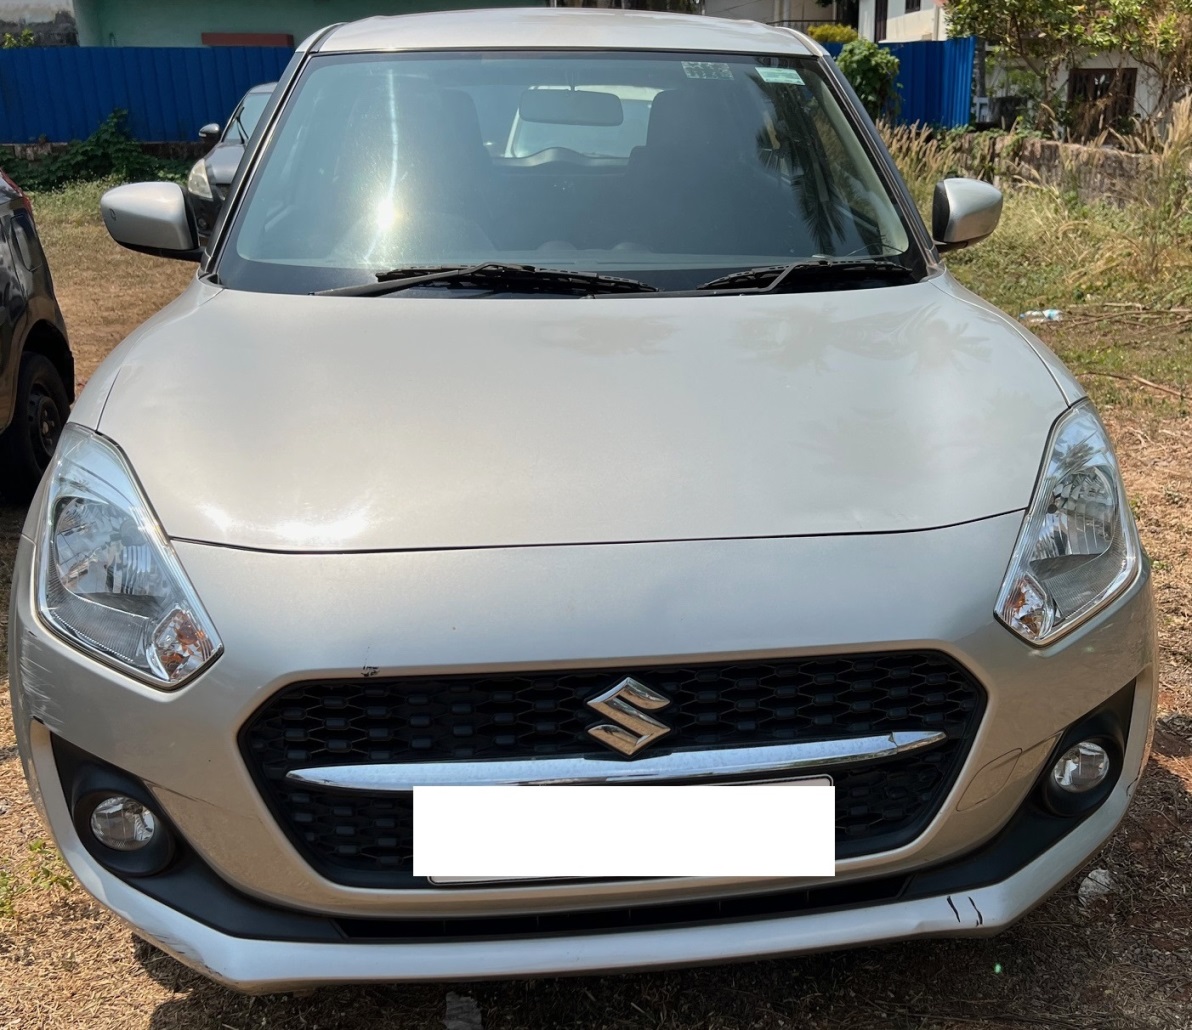 MARUTI SWIFT 2021 Second-hand Car for Sale in Kasaragod